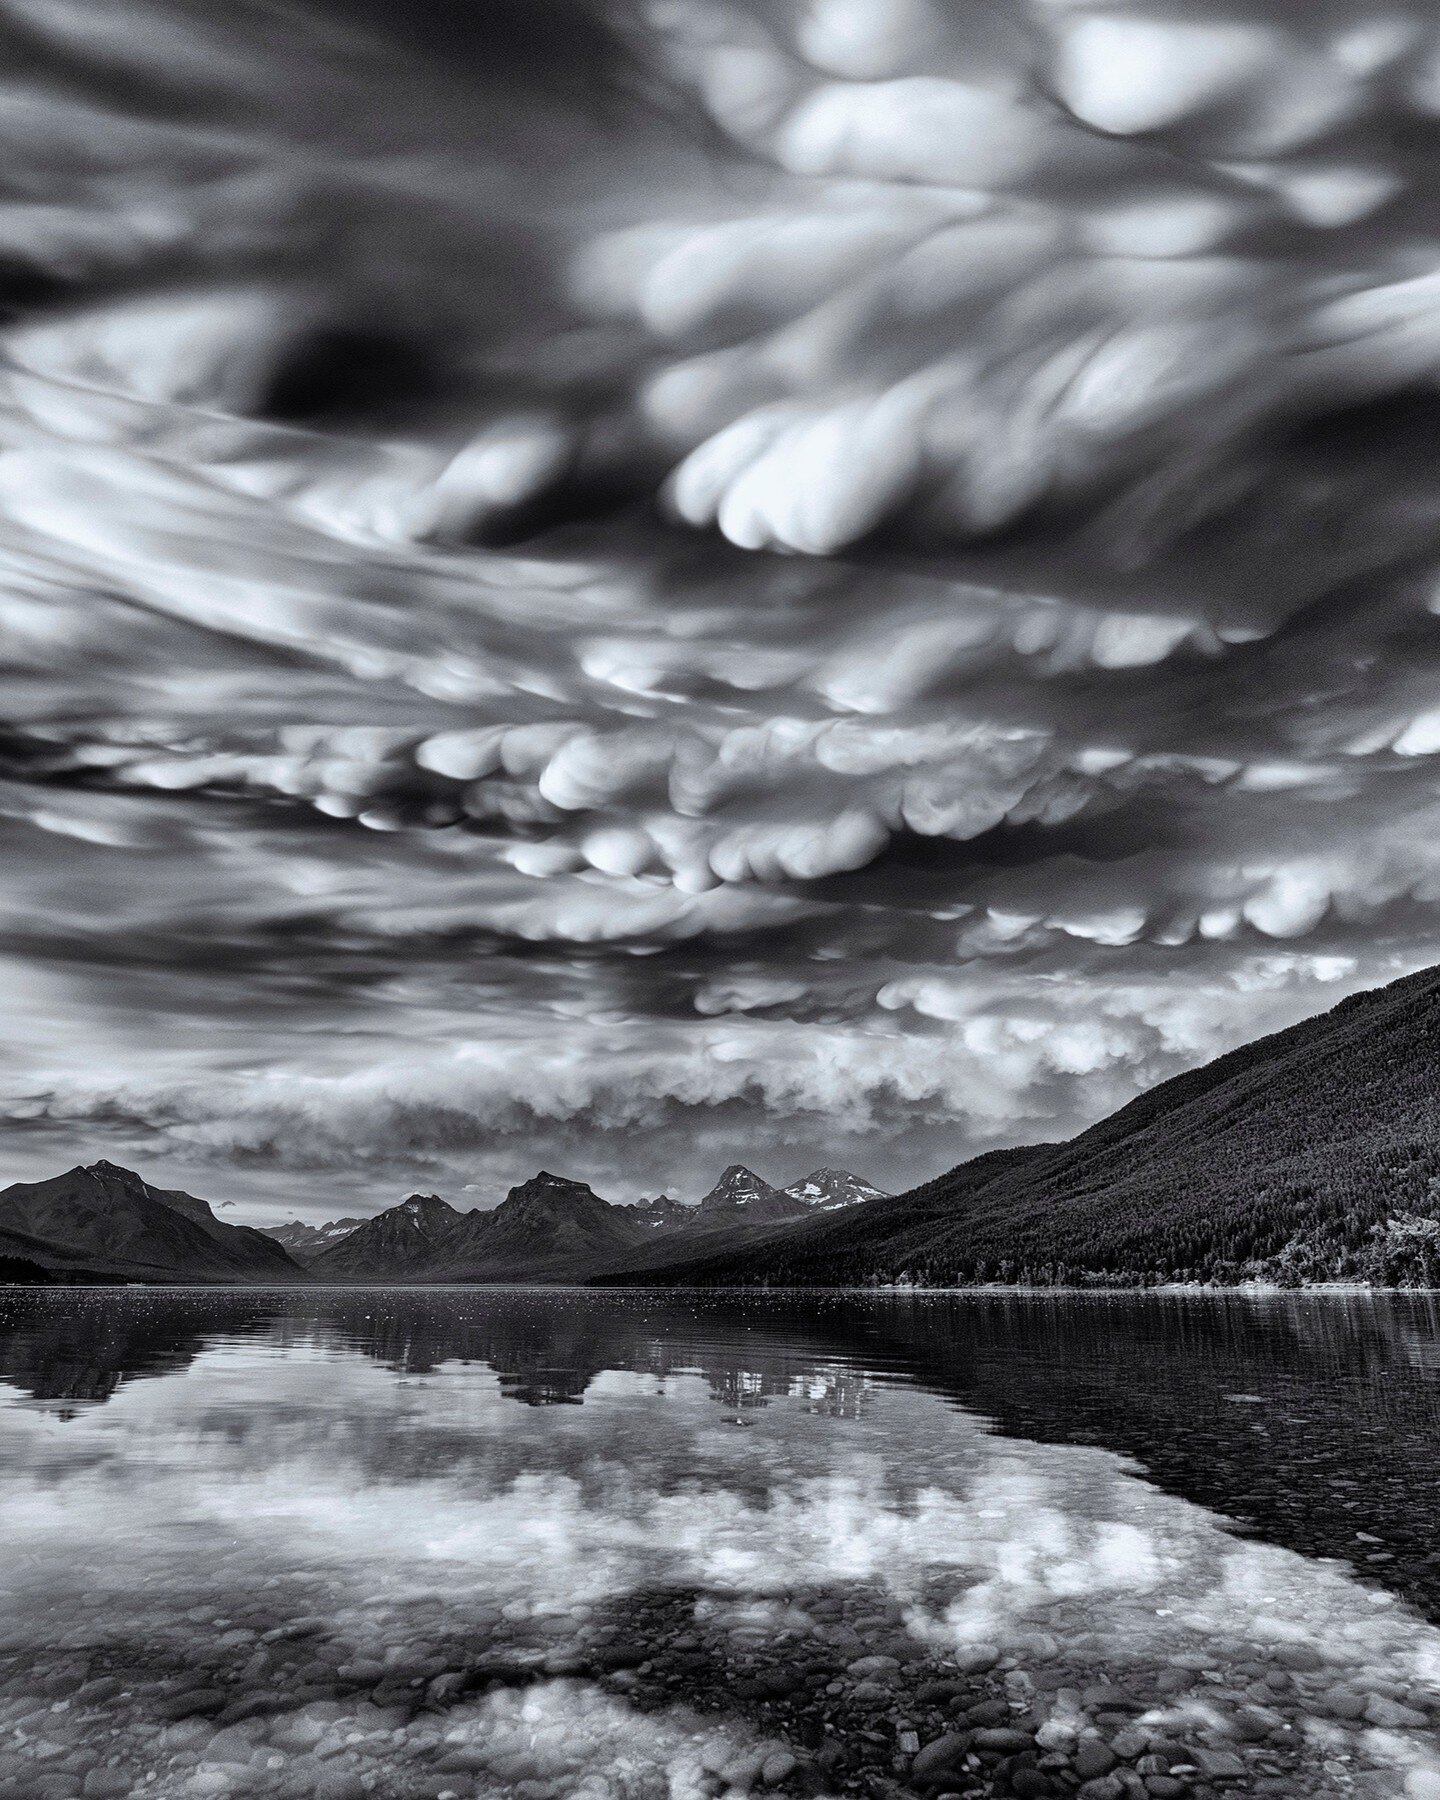 This summer, I was out paddle boarding on Lake McDonald when I looked up and saw the most amazing Mammatus Clouds I've ever seen.

I paused to watch them dance and take in the beauty and then I hustled to shore&hellip;so I could grab some photos but 